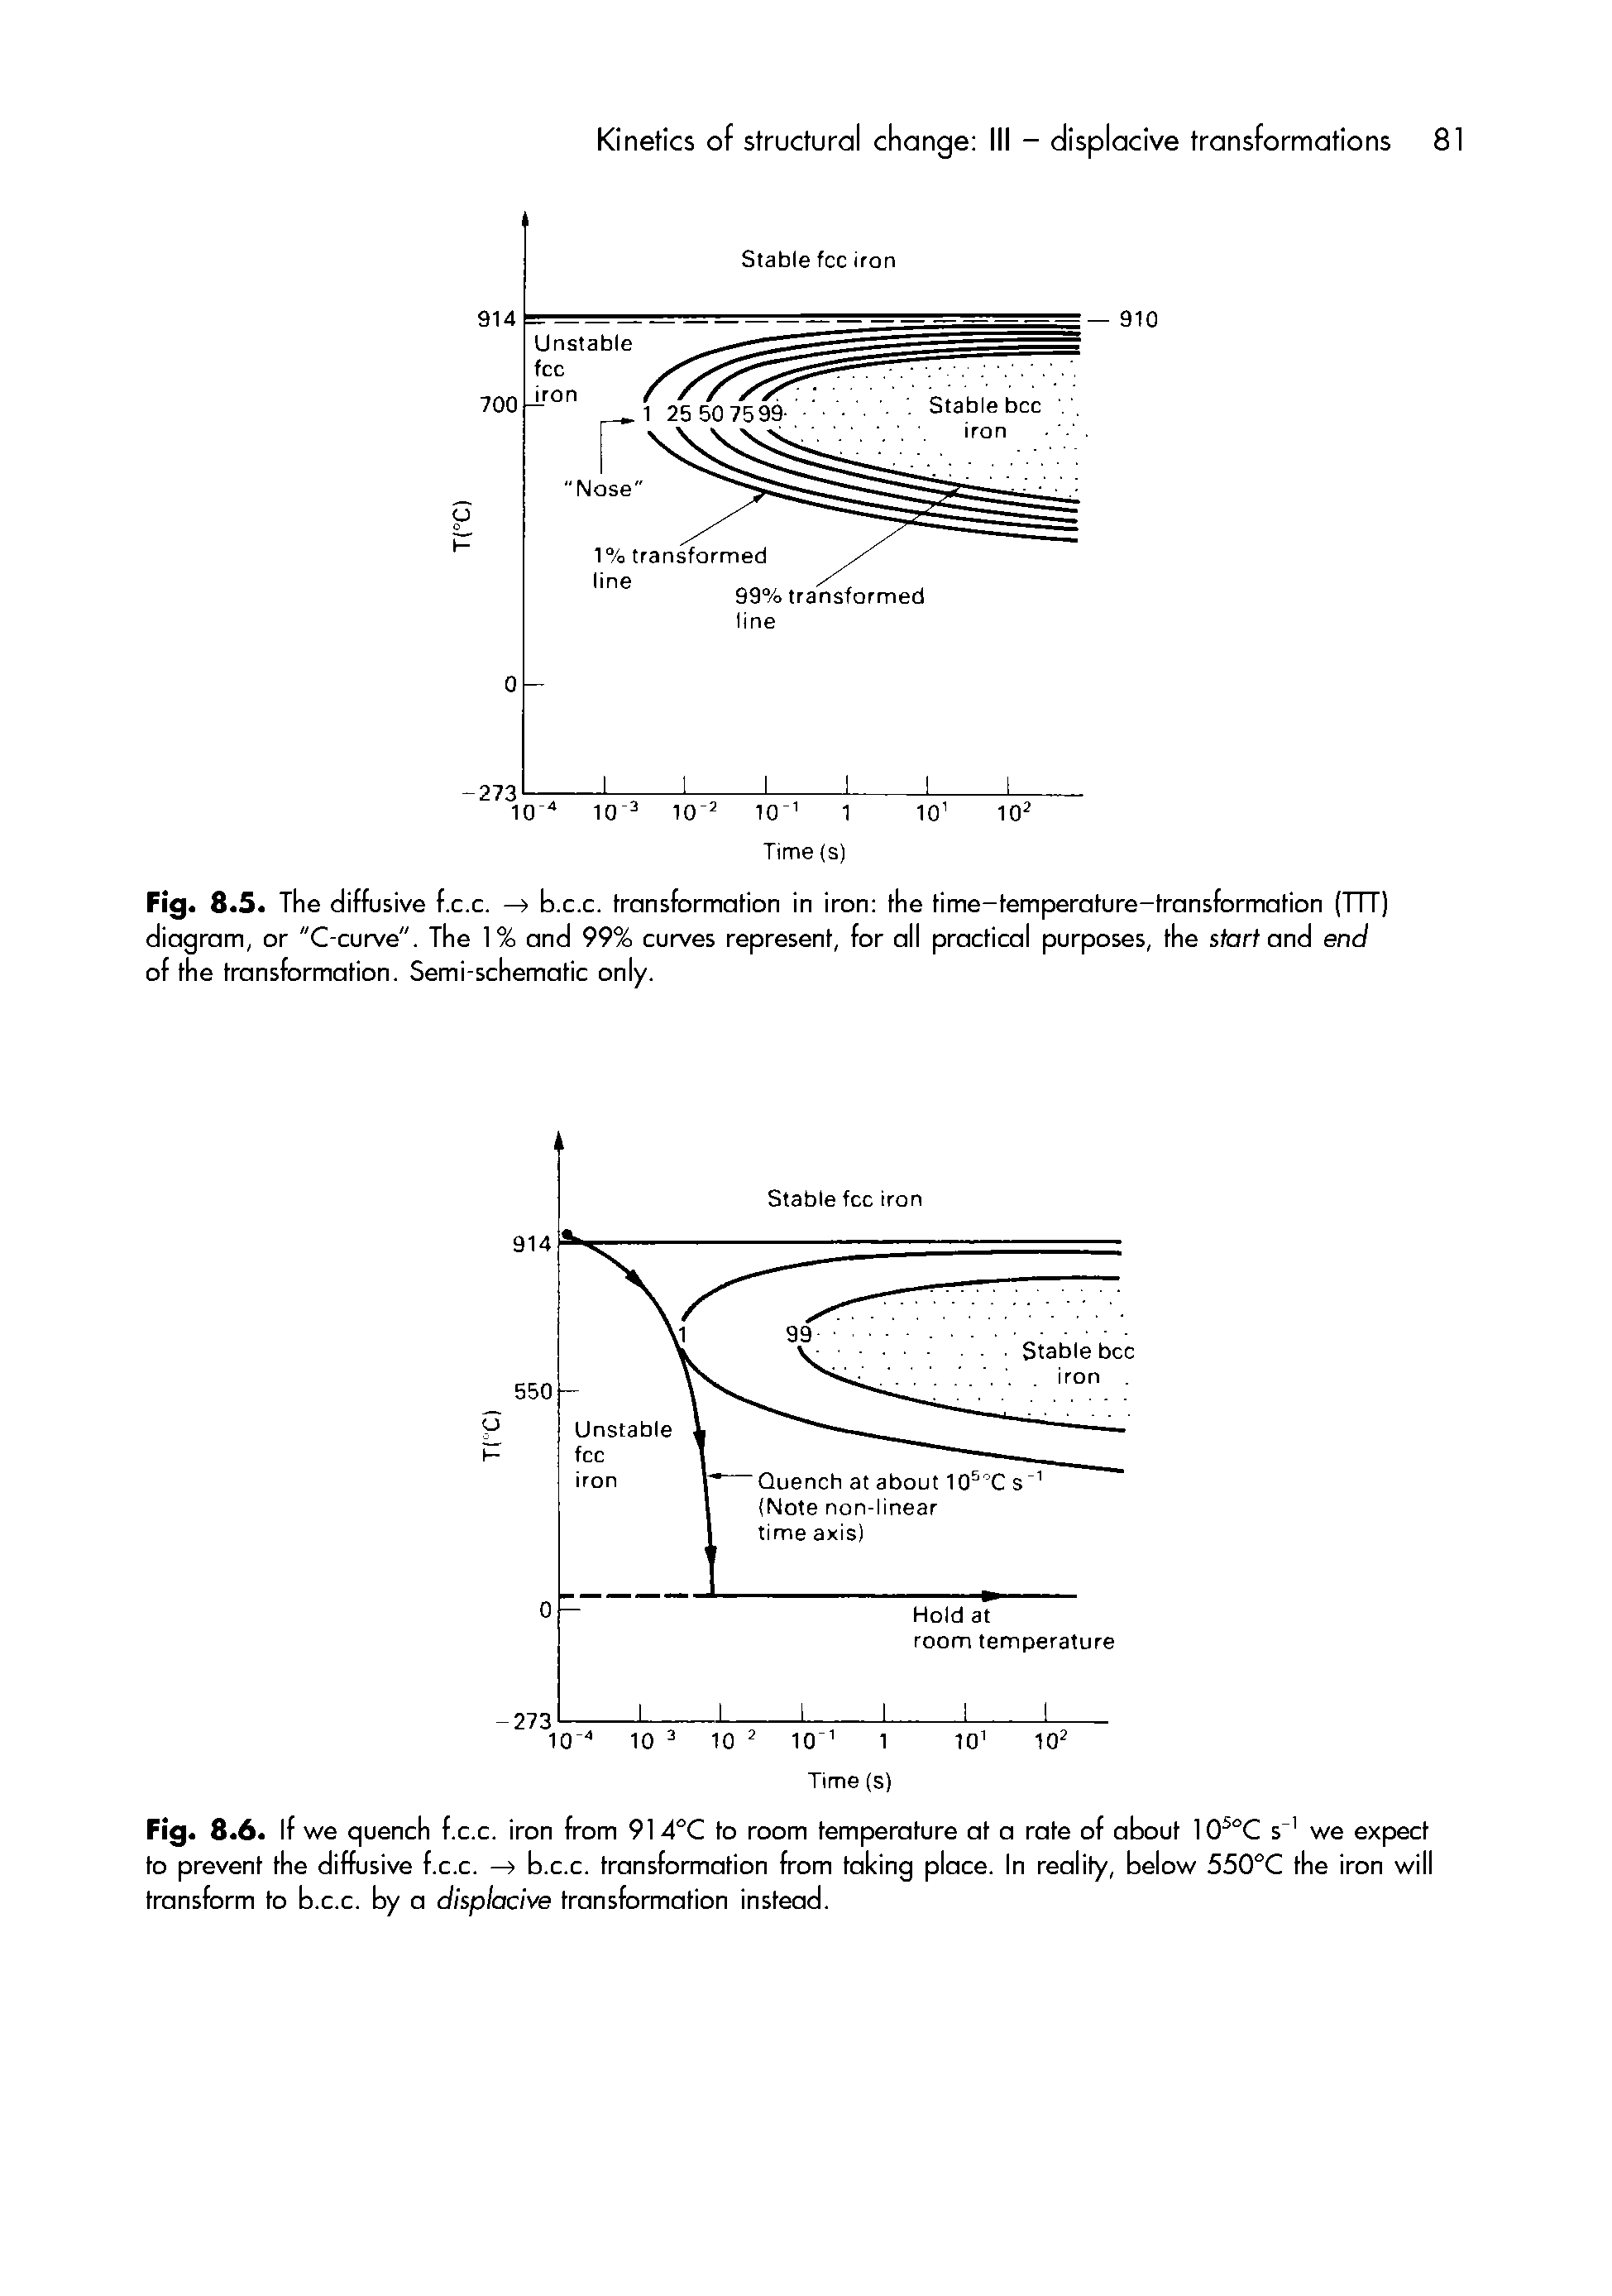 Fig. 8.5. The diffusive f.c.c. —> b.c.c. transformation in iron the time-temperature-transformation (TTT) diagram, or "C-curve". The 1% and 99% curves represent, for oil practical purposes, the stort and end of the transformation. Semi-schematic only.